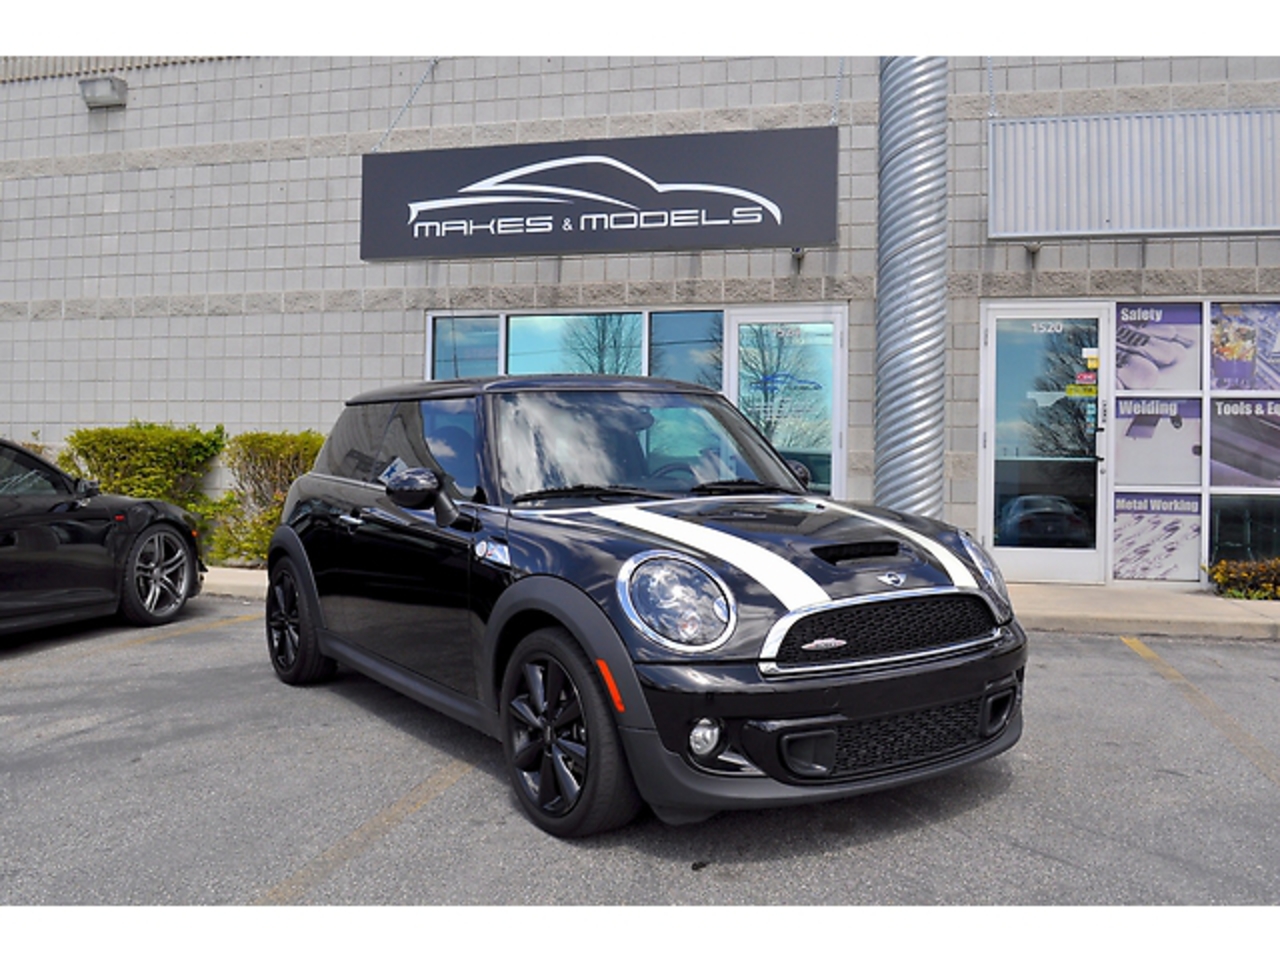 Mini Cooper 16 / Search in Store - Specs, Videos, Photos, Reviews ...